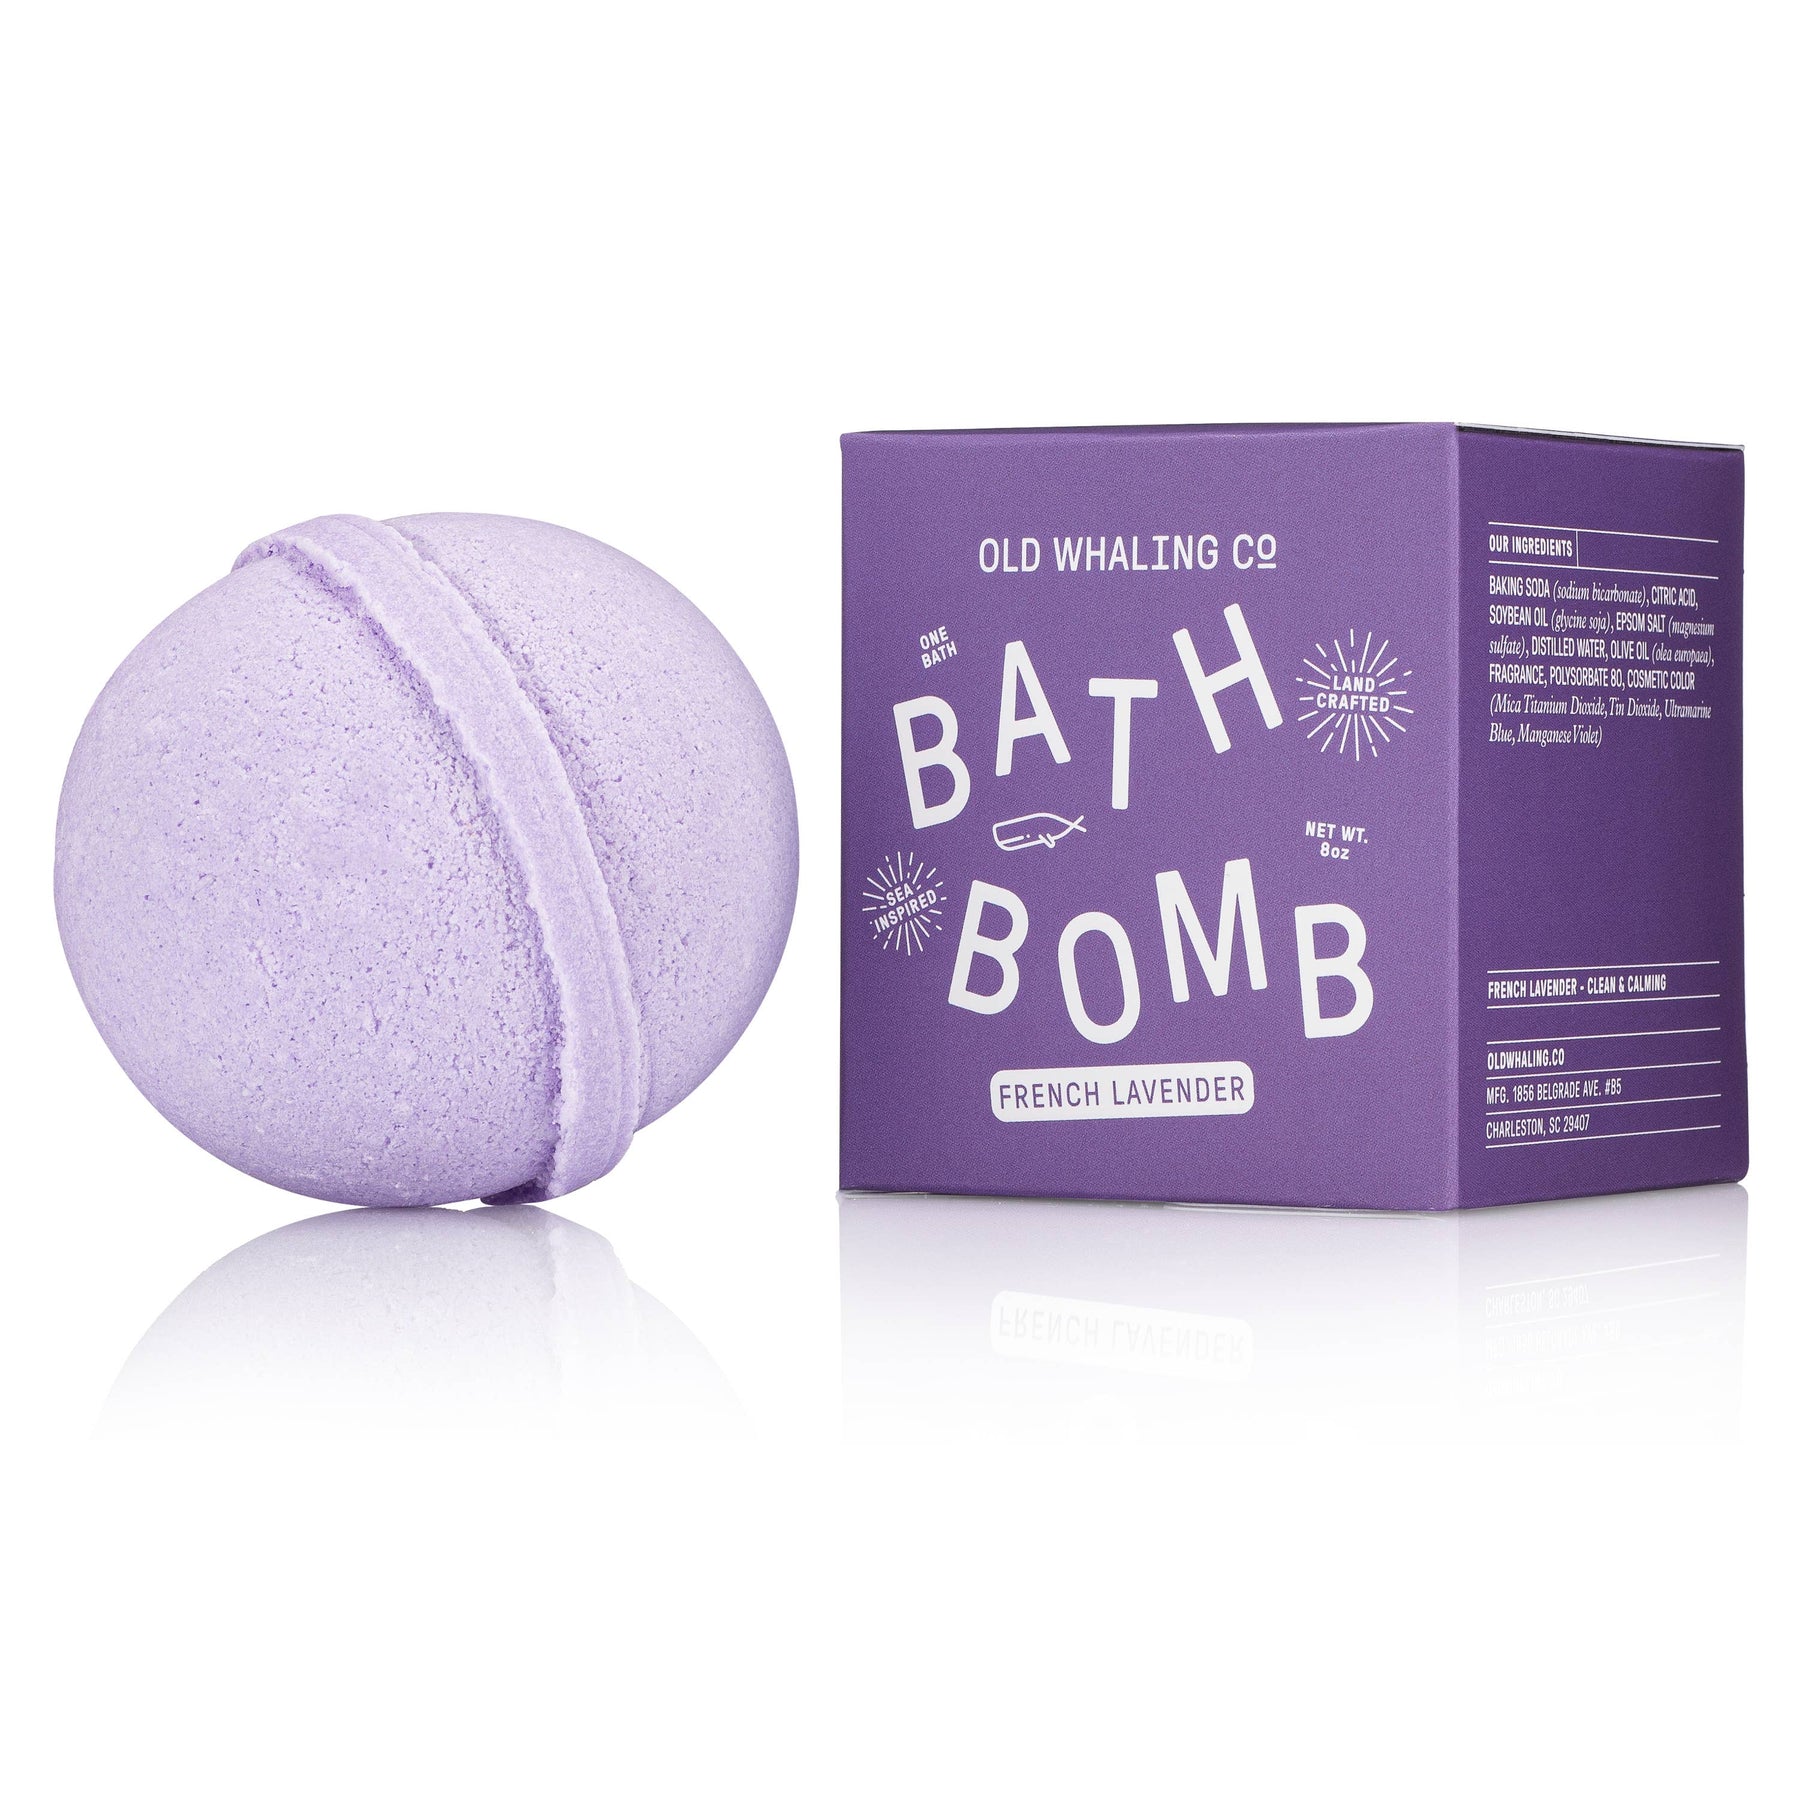 French Lavender Bath Bomb - Old Whaling Company